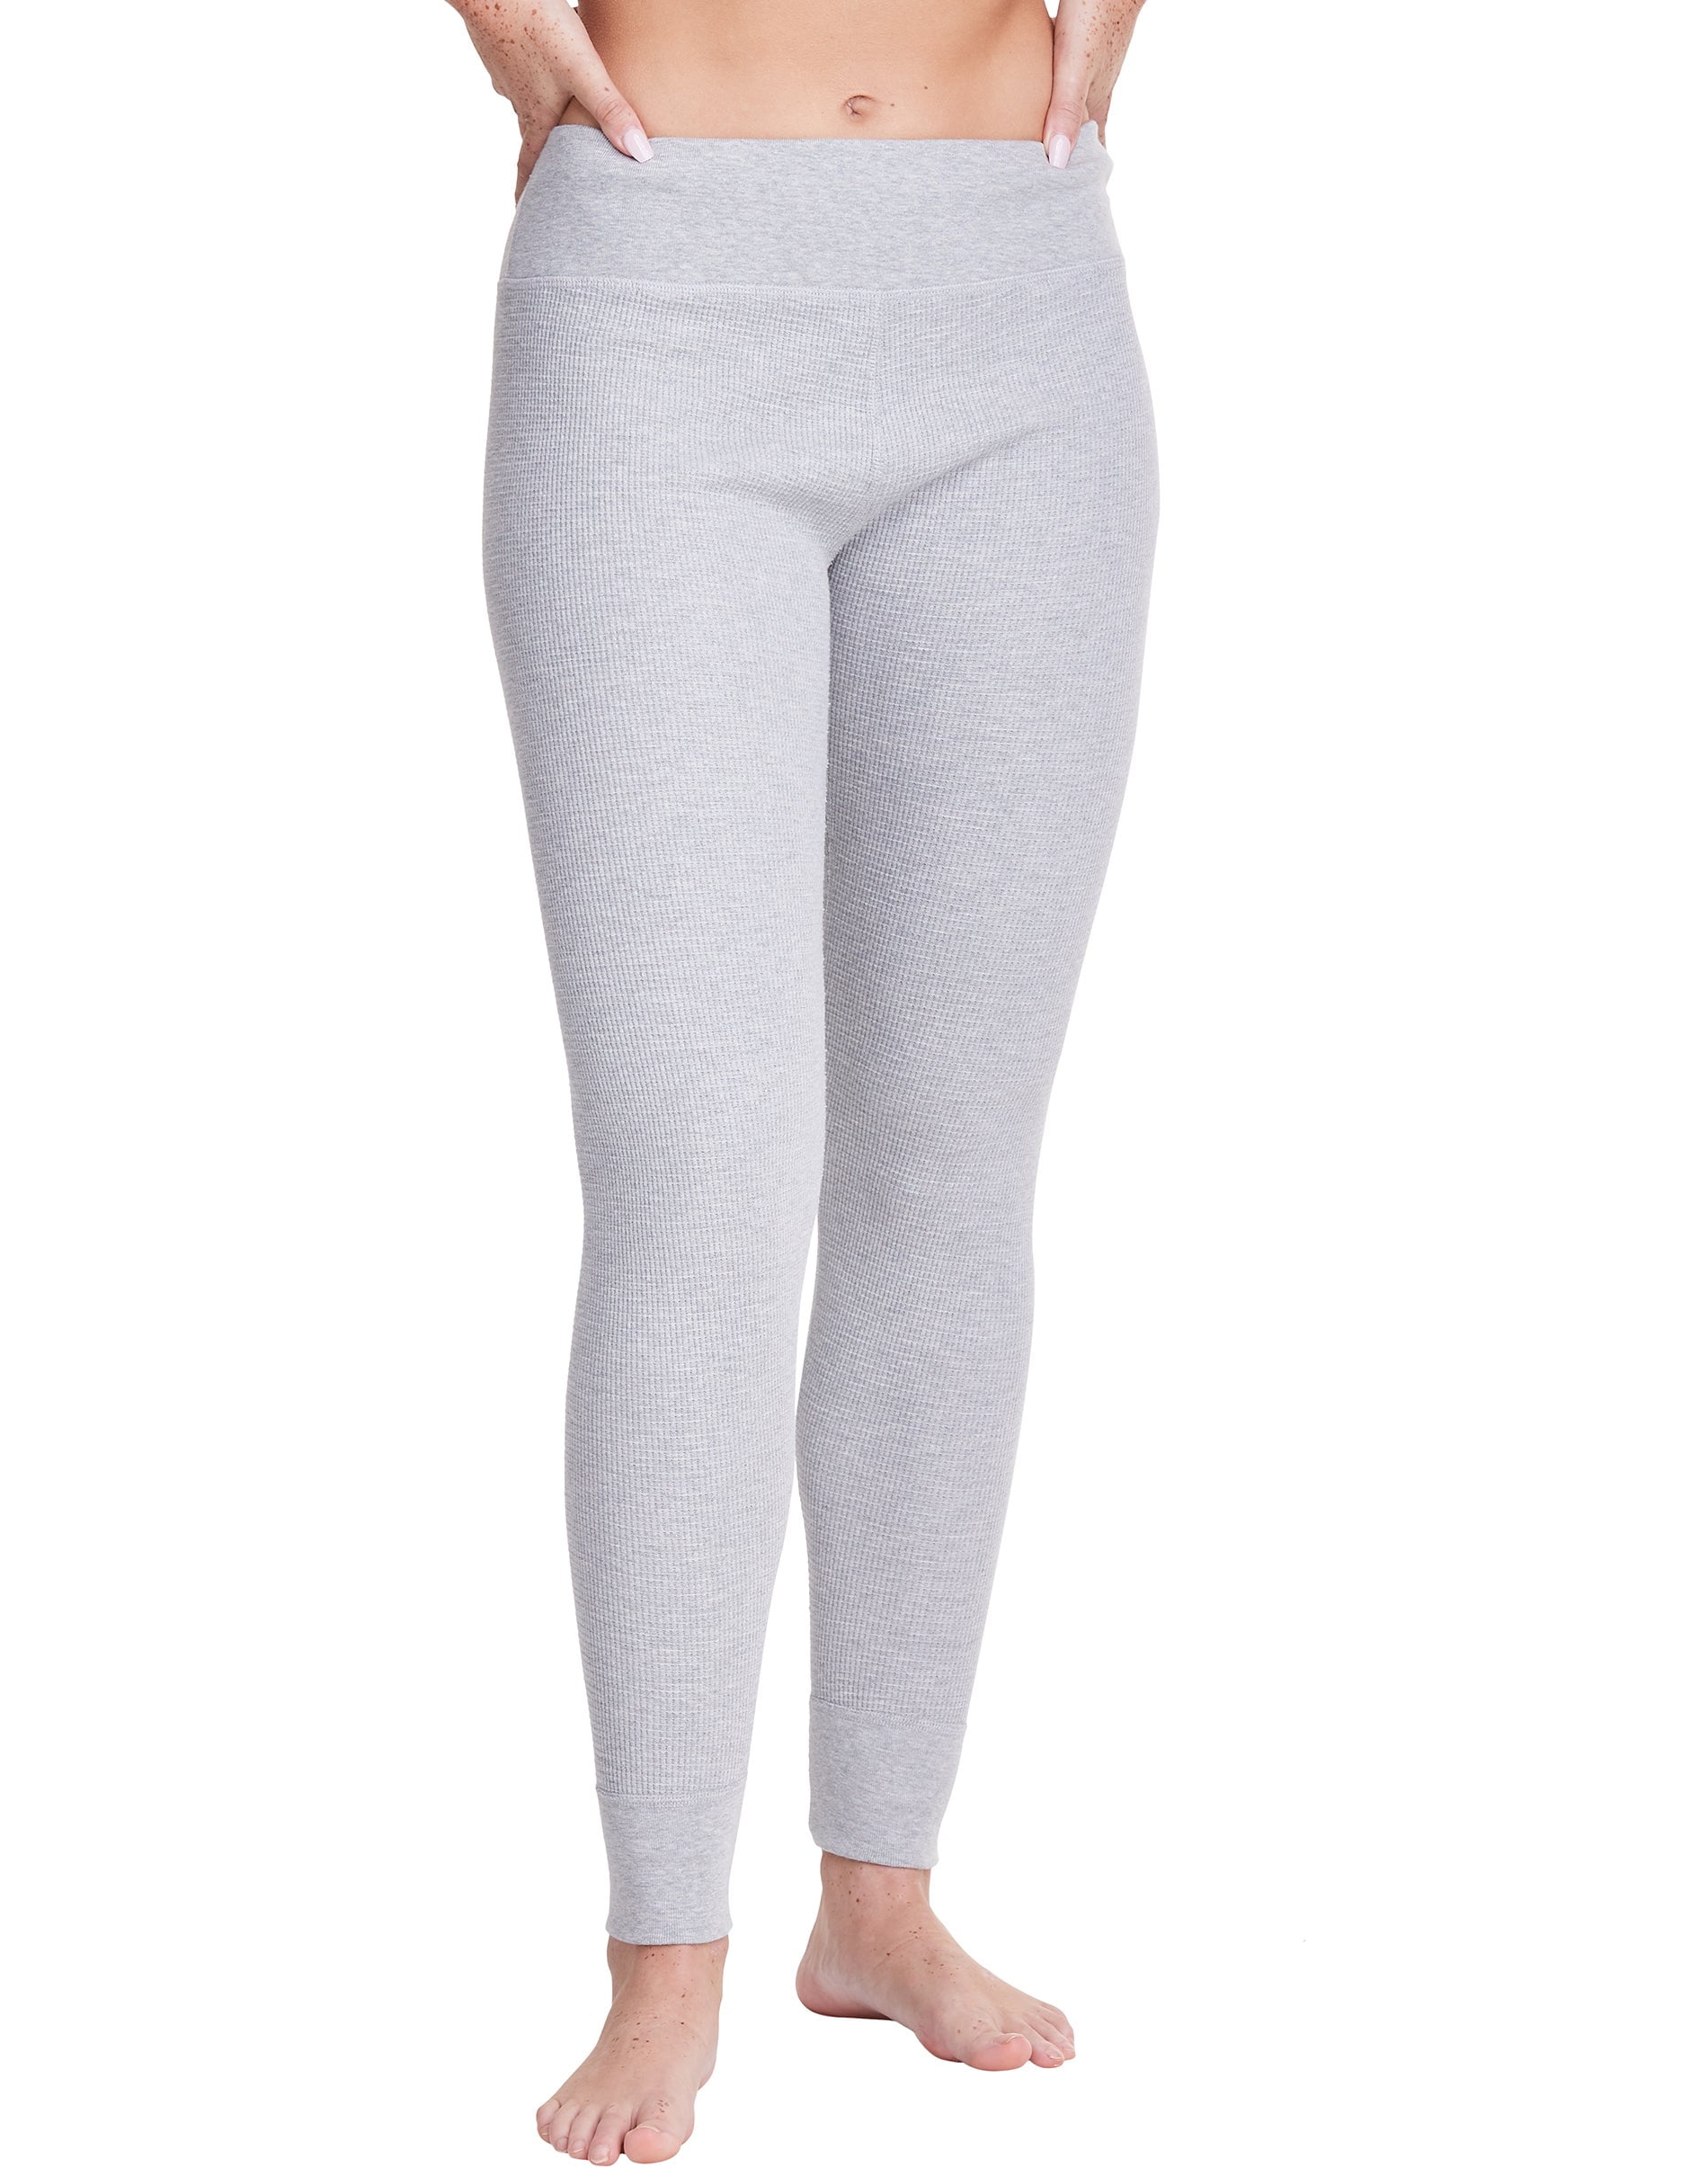 Hanes Women's Relaxed Fit Waffle Knit Leggings With Yoga Waistband Grey  Heather L